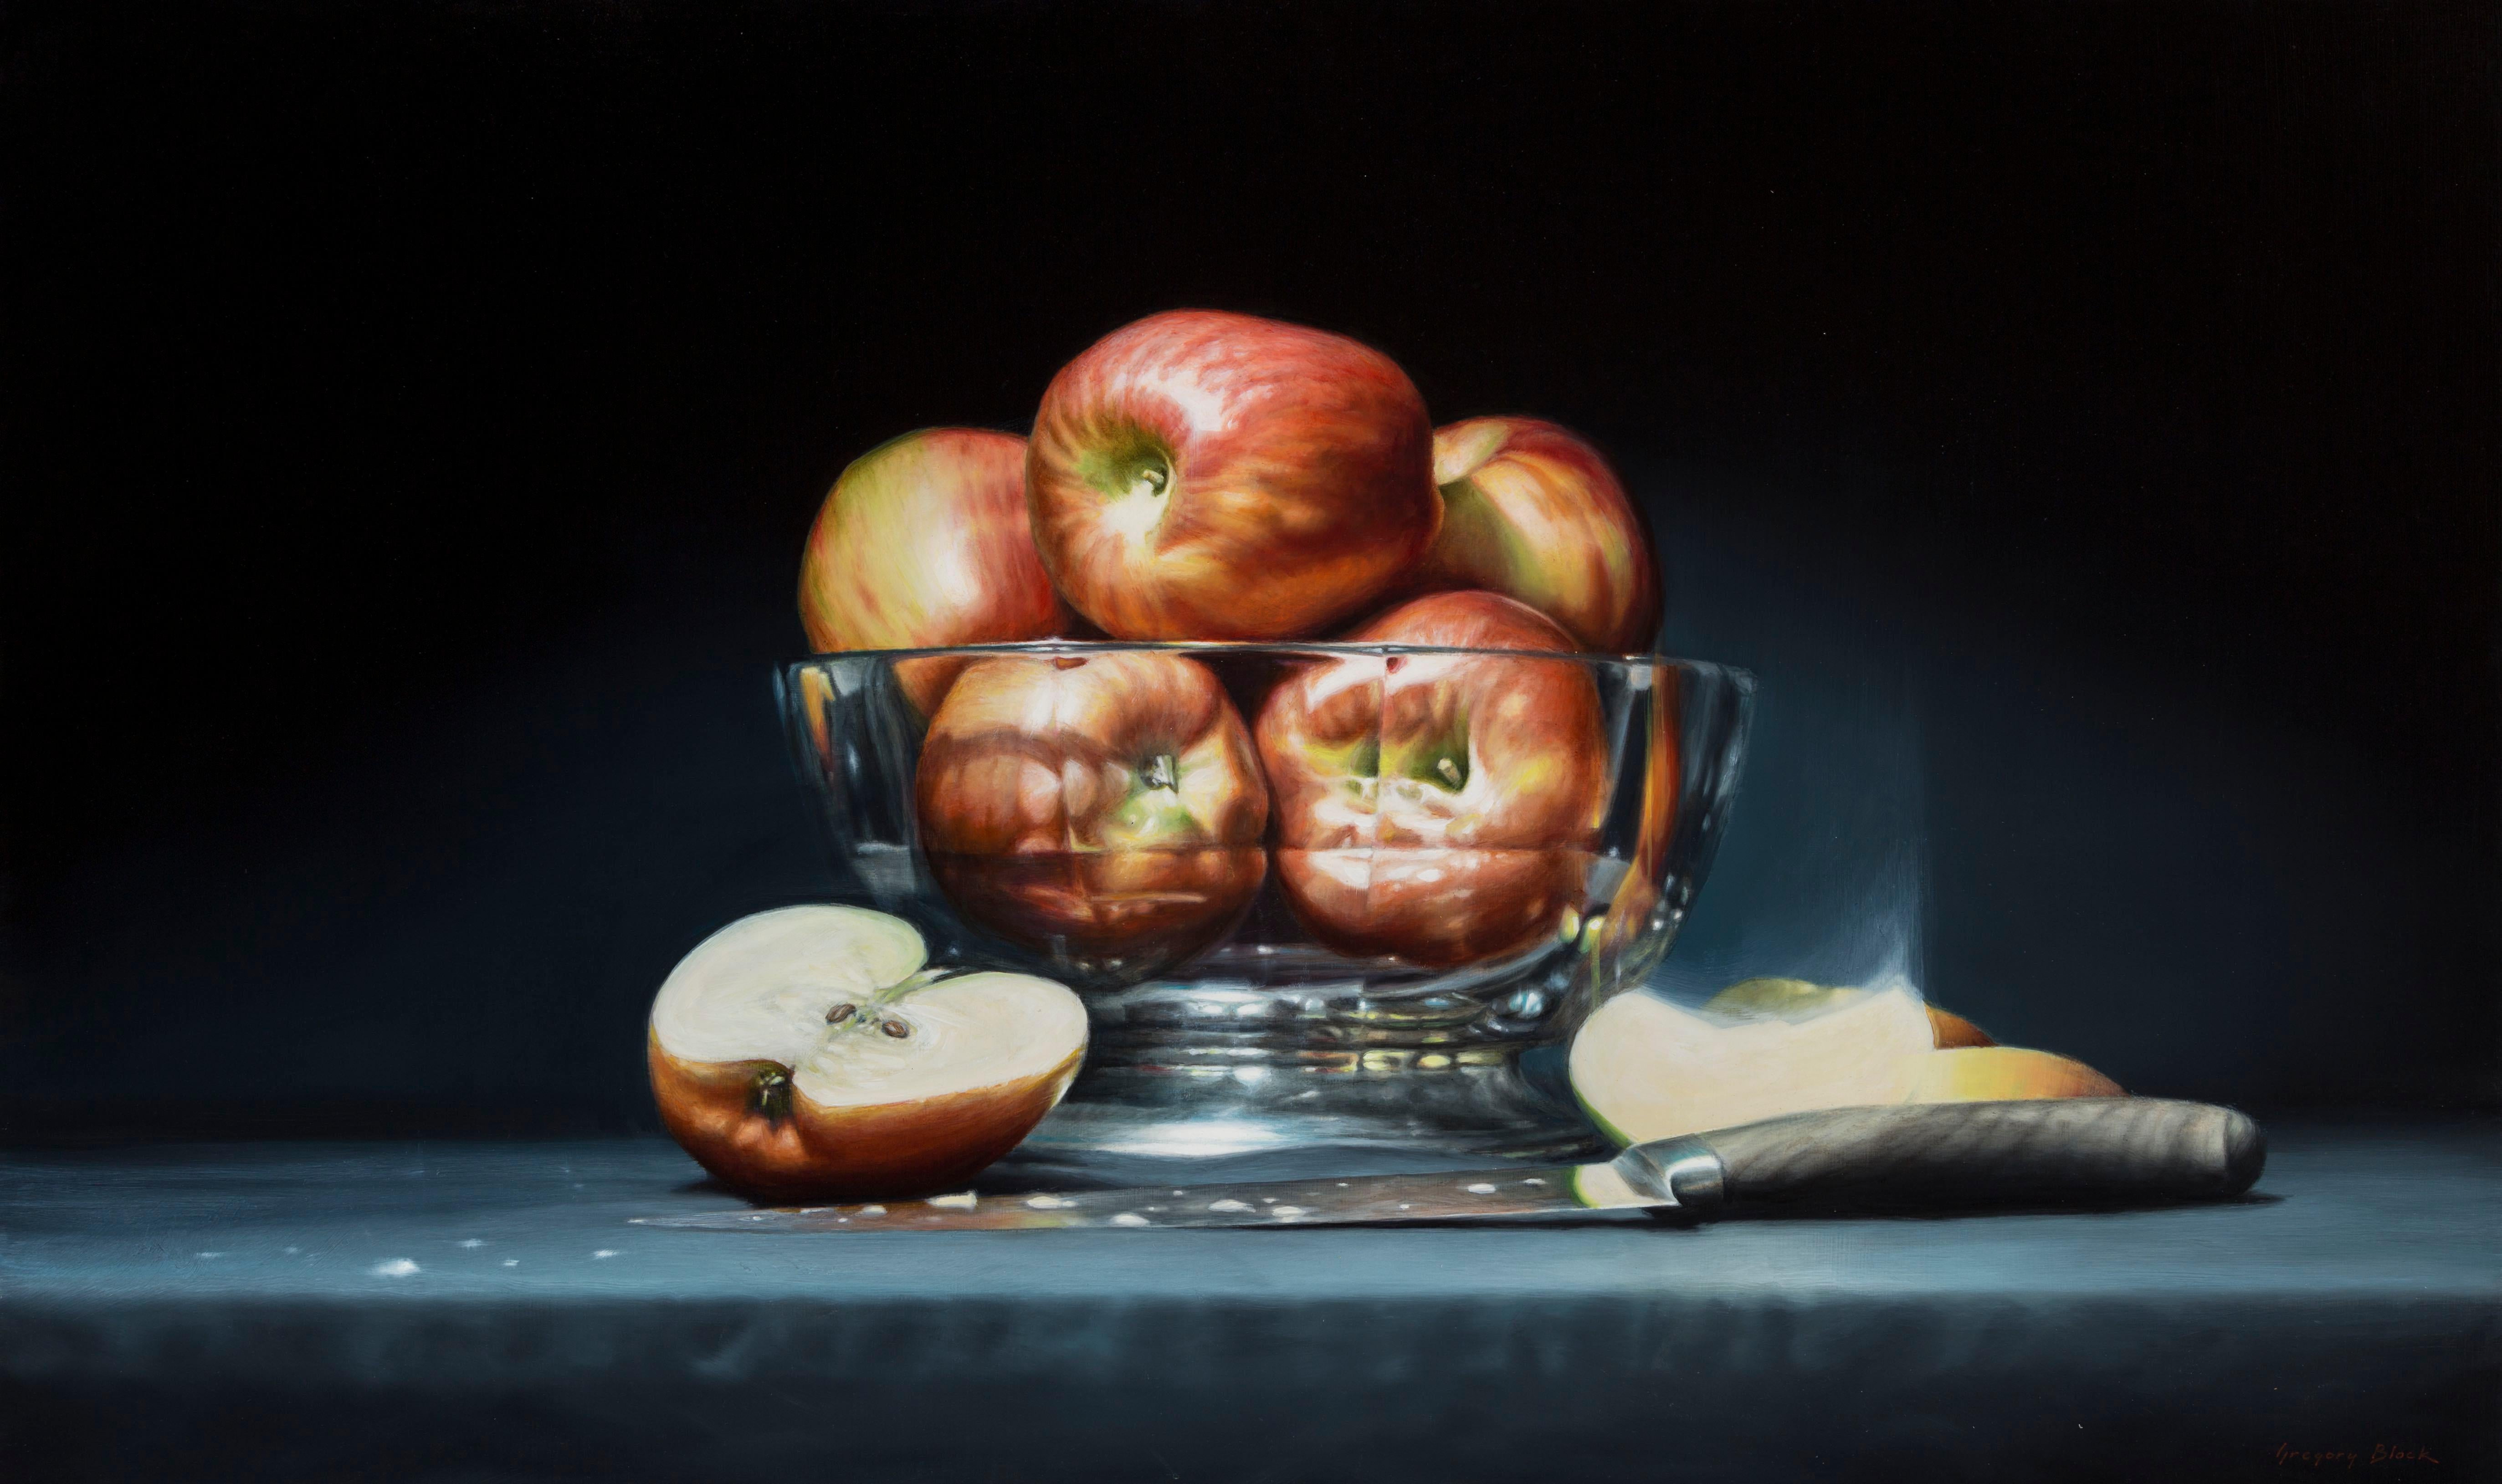 Gregory Block Figurative Painting - "Apples" Oil Painting